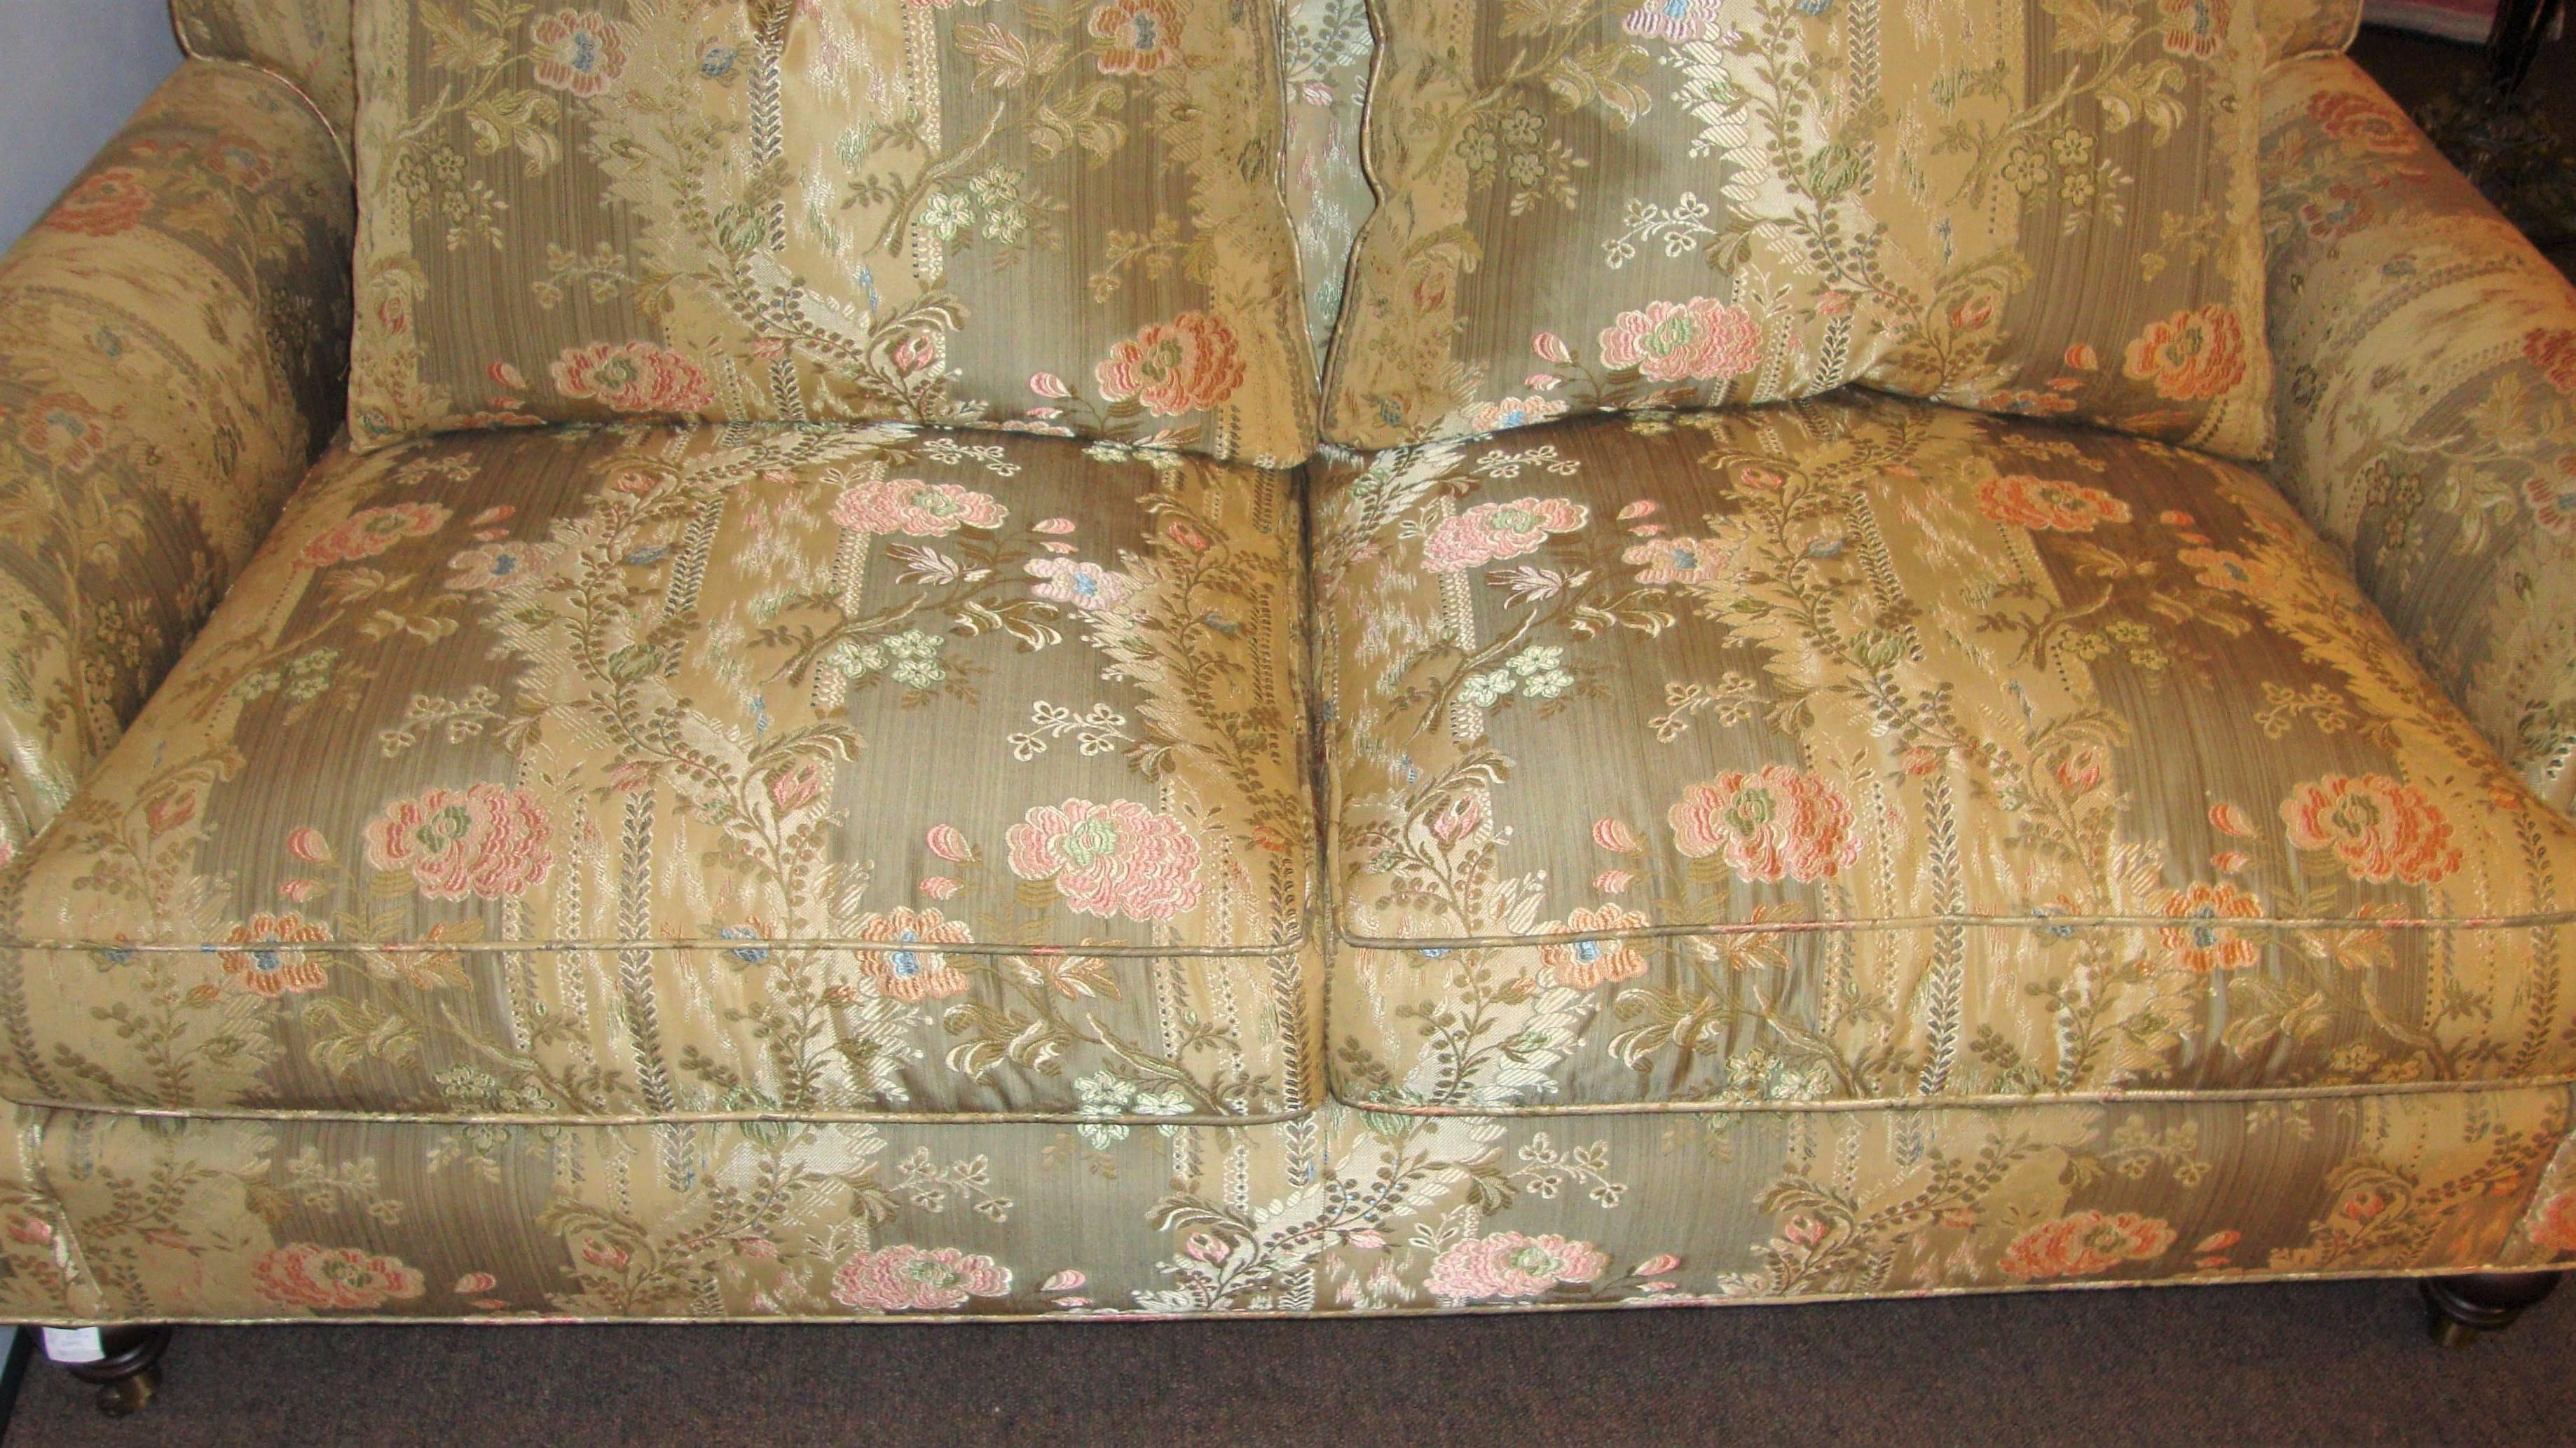 A pair of oversized Edward Ferrell signed floral print loveseats. These super comfy couches bring two matching back pillows each supported by bun feet on casters. Finest quality by one of the hottest designers. Directly from an North Shore Long